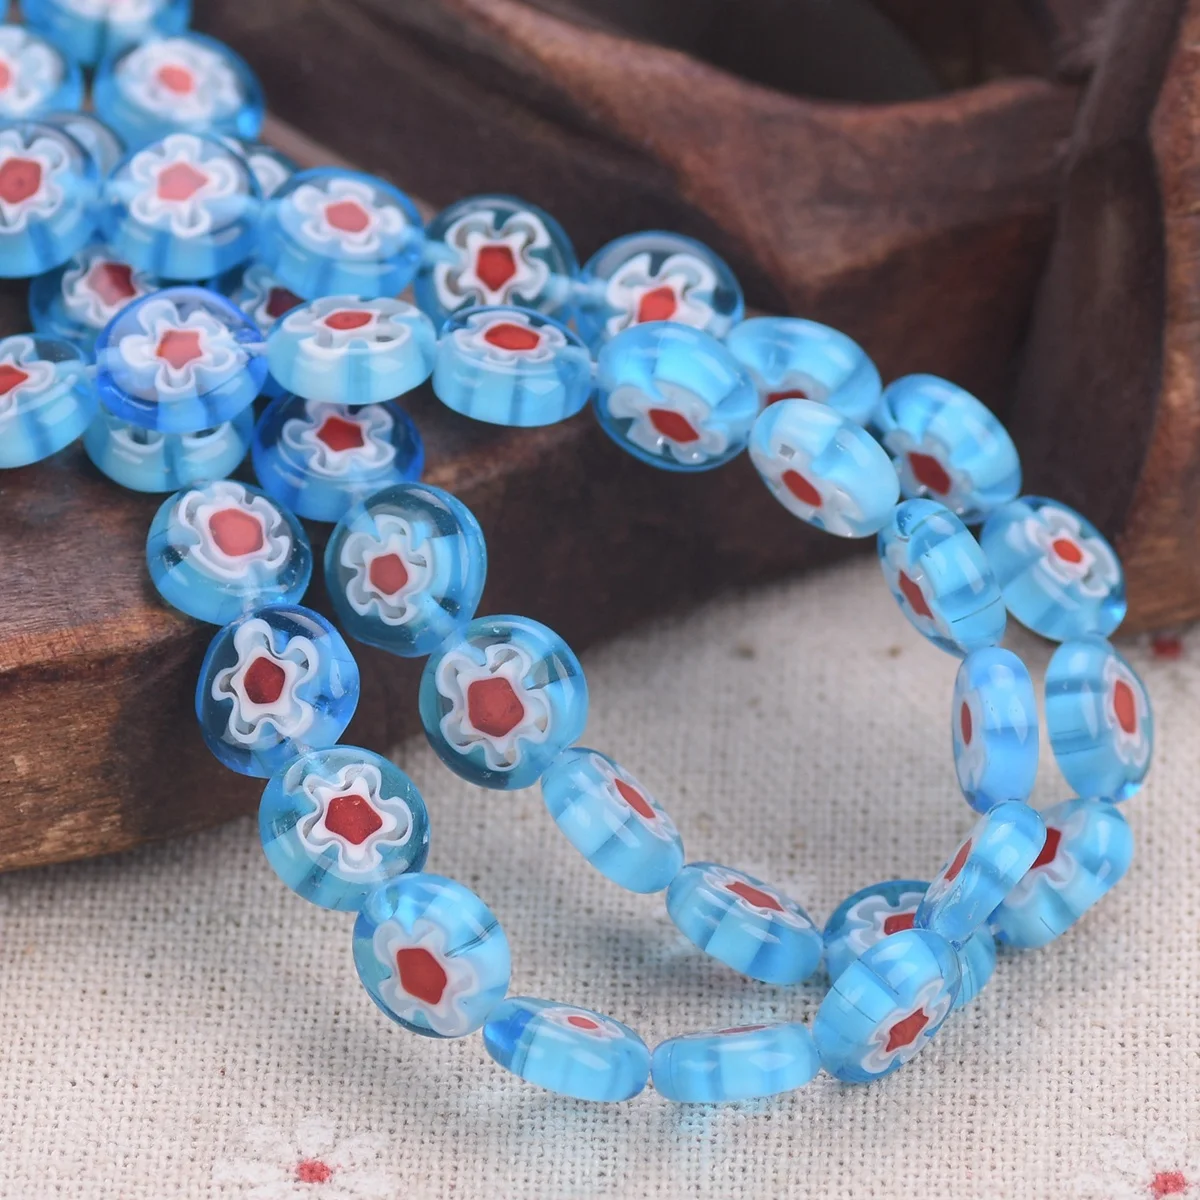 35pcs(1 Strand) Flat Round 10mm Lake Blue Flower Handmade Millefiori Glass Loose Beads Lot For Jewelry Making DIY Craft Findings 10mm multicolors pu leather cord flat leather string craft cord for diy jewelry making accessories wholesale supplier